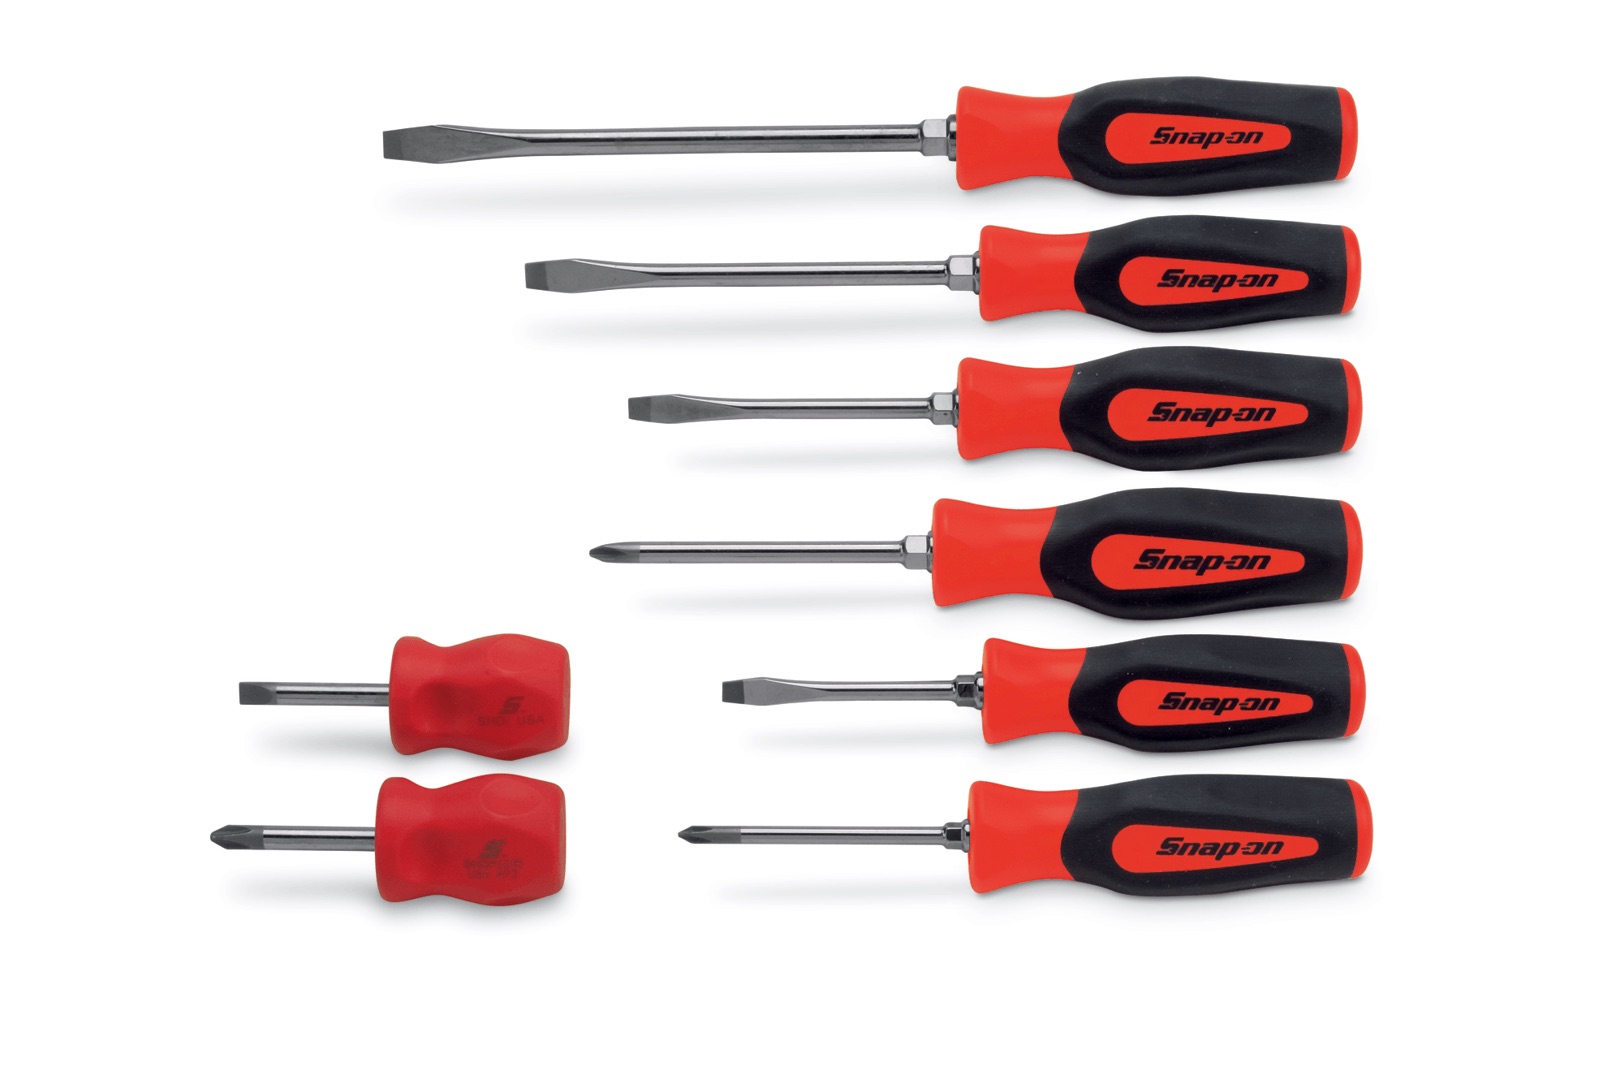 What Do You Use To Clean Snap-On Hand Tools